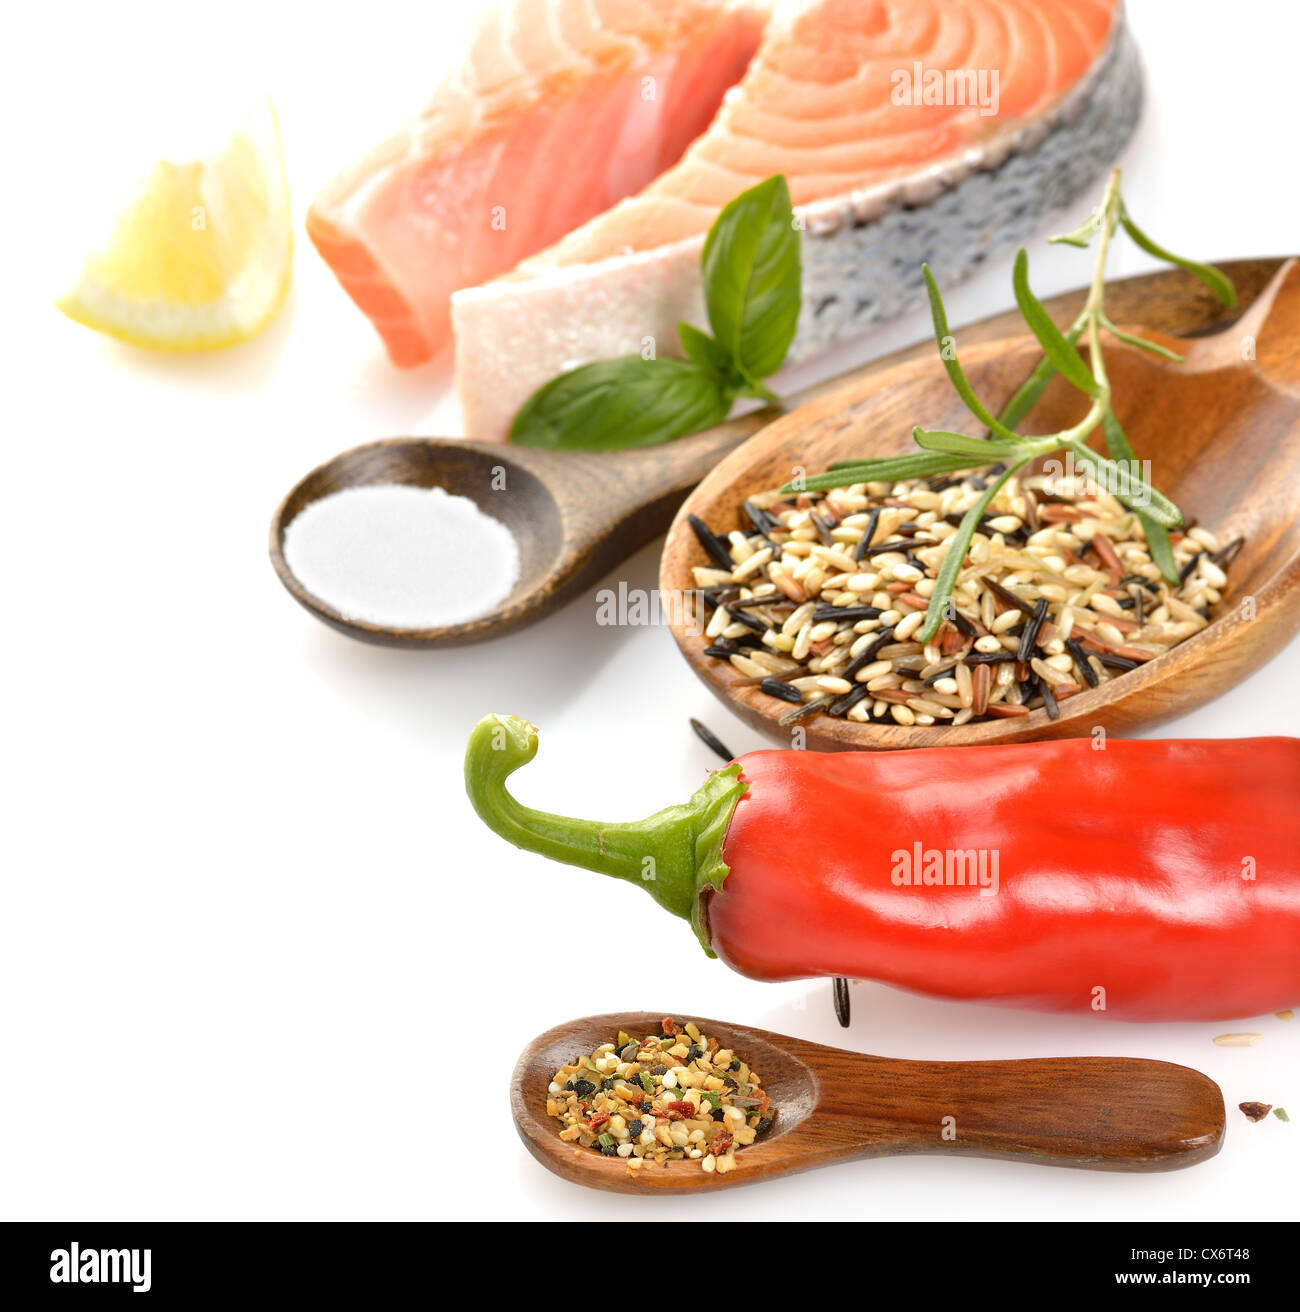 Slice Of Salmon And Wild Rice With Spices Stock Photo